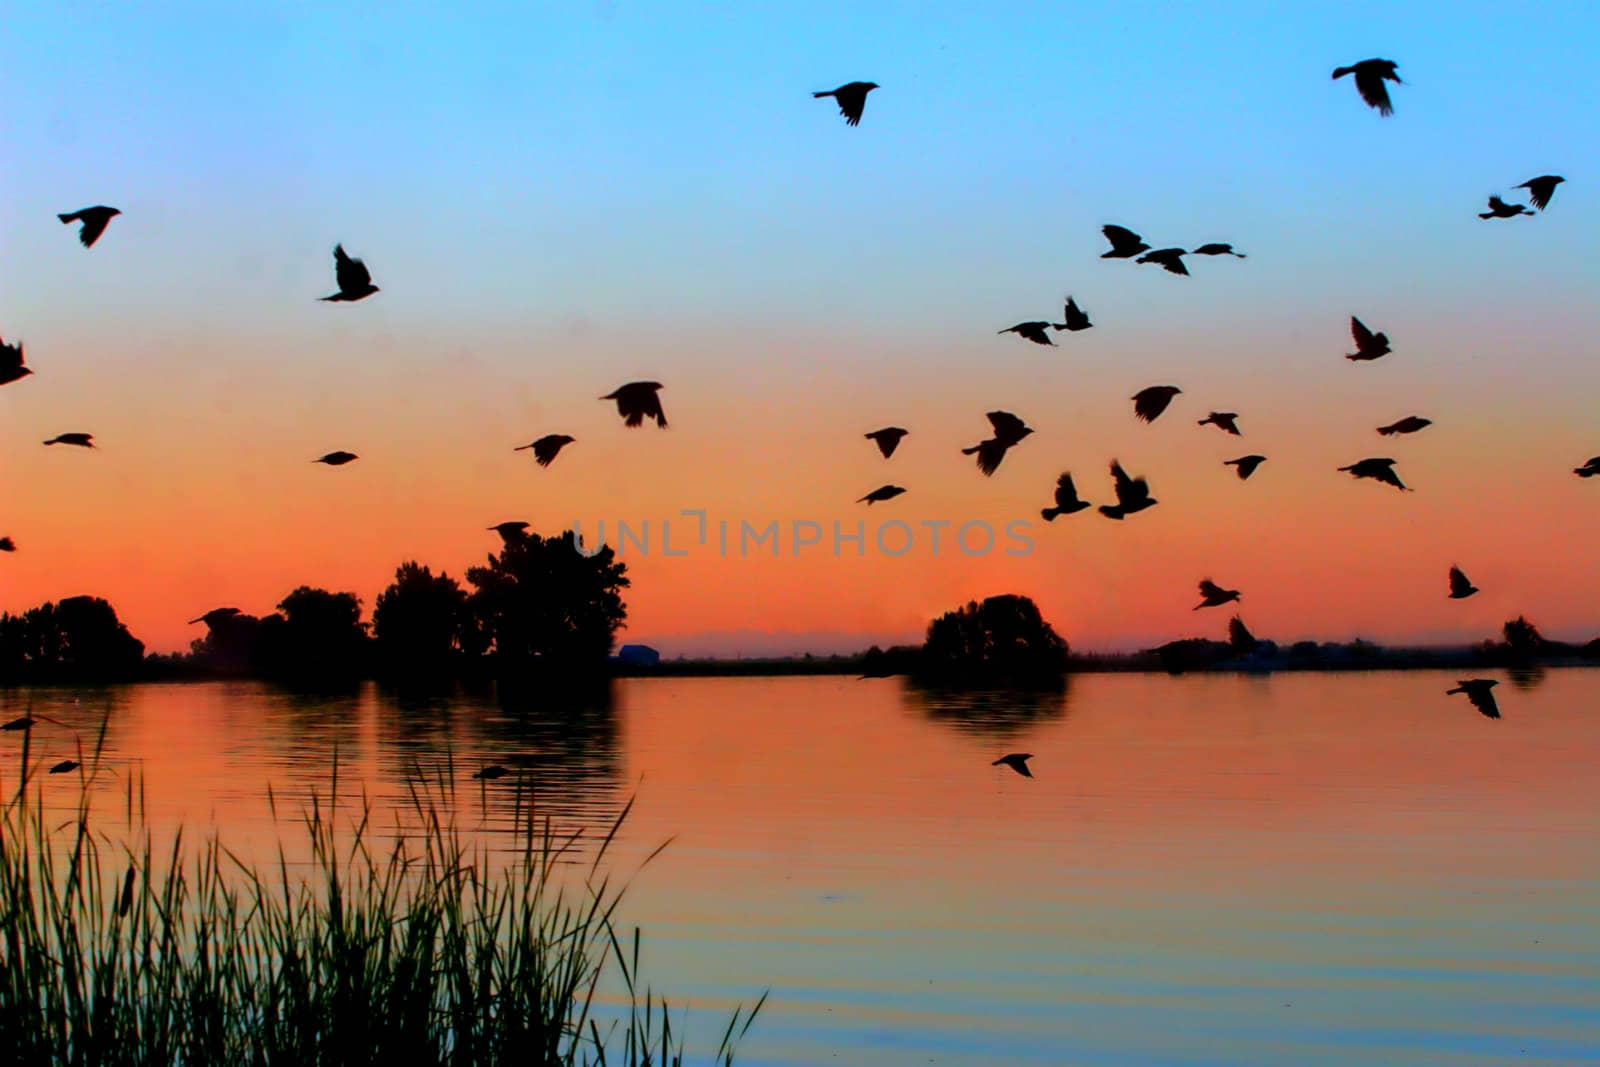 Late evening sunset over lake with birds